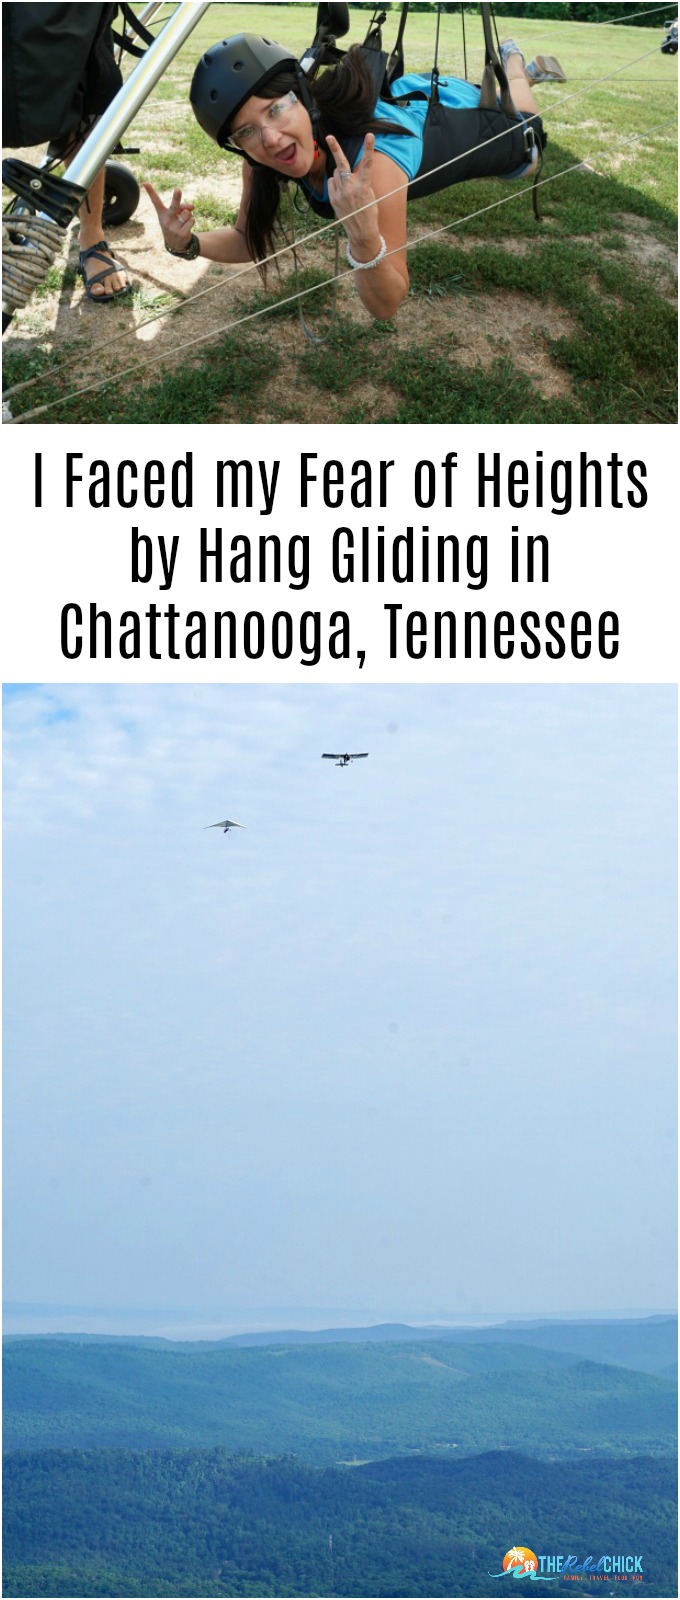 I Faced my Fear of Heights While Hang Gliding in Chattanooga 